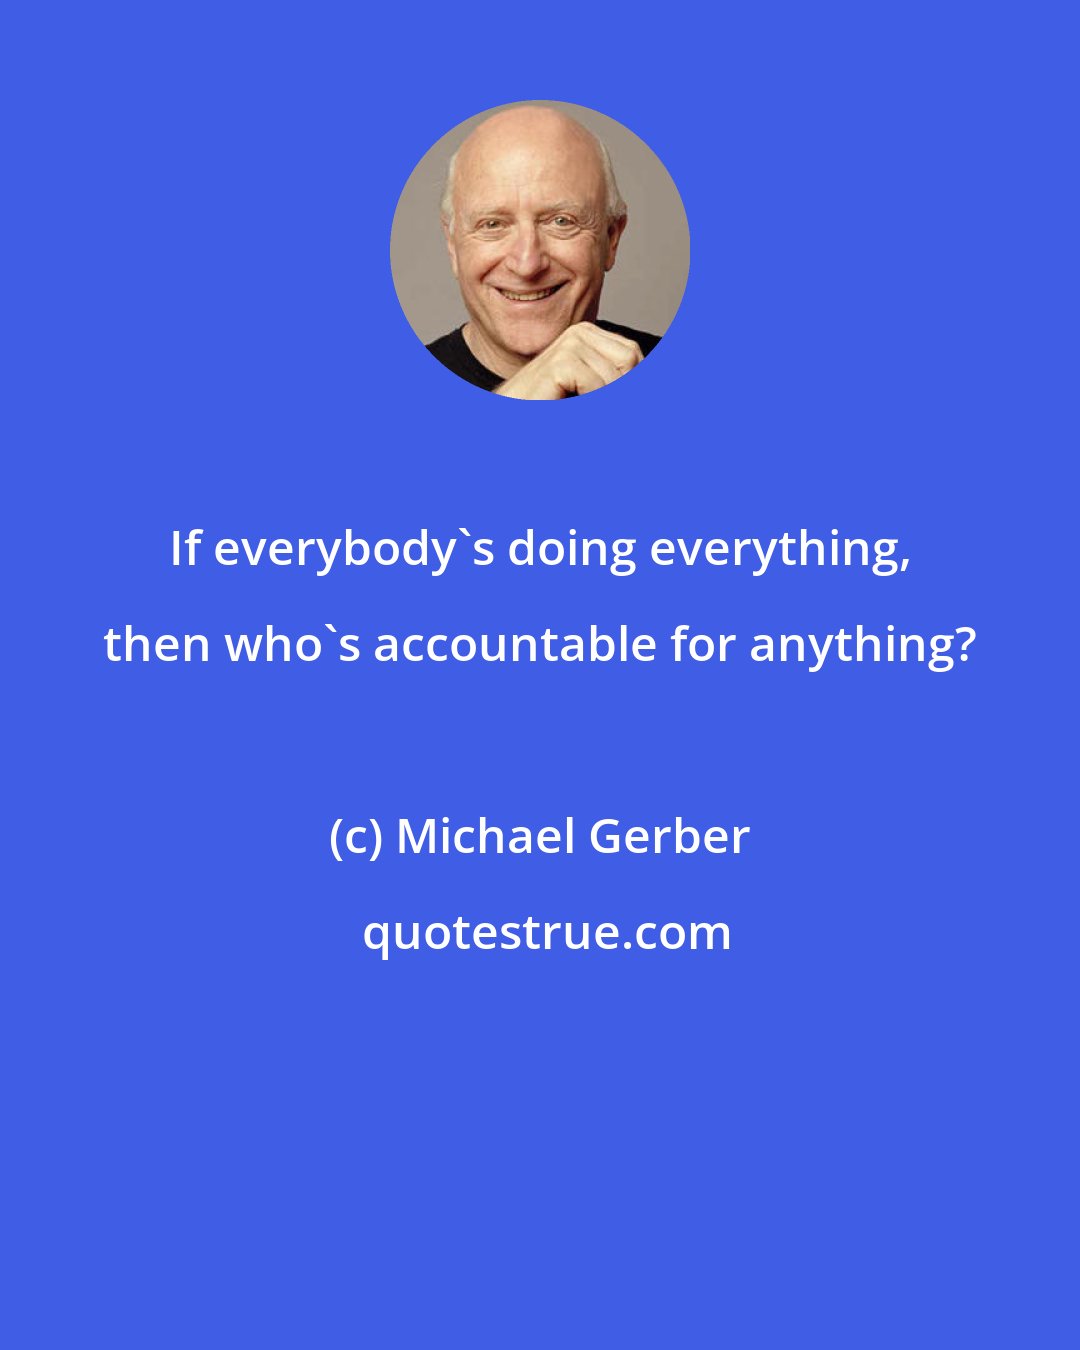 Michael Gerber: If everybody's doing everything, then who's accountable for anything?